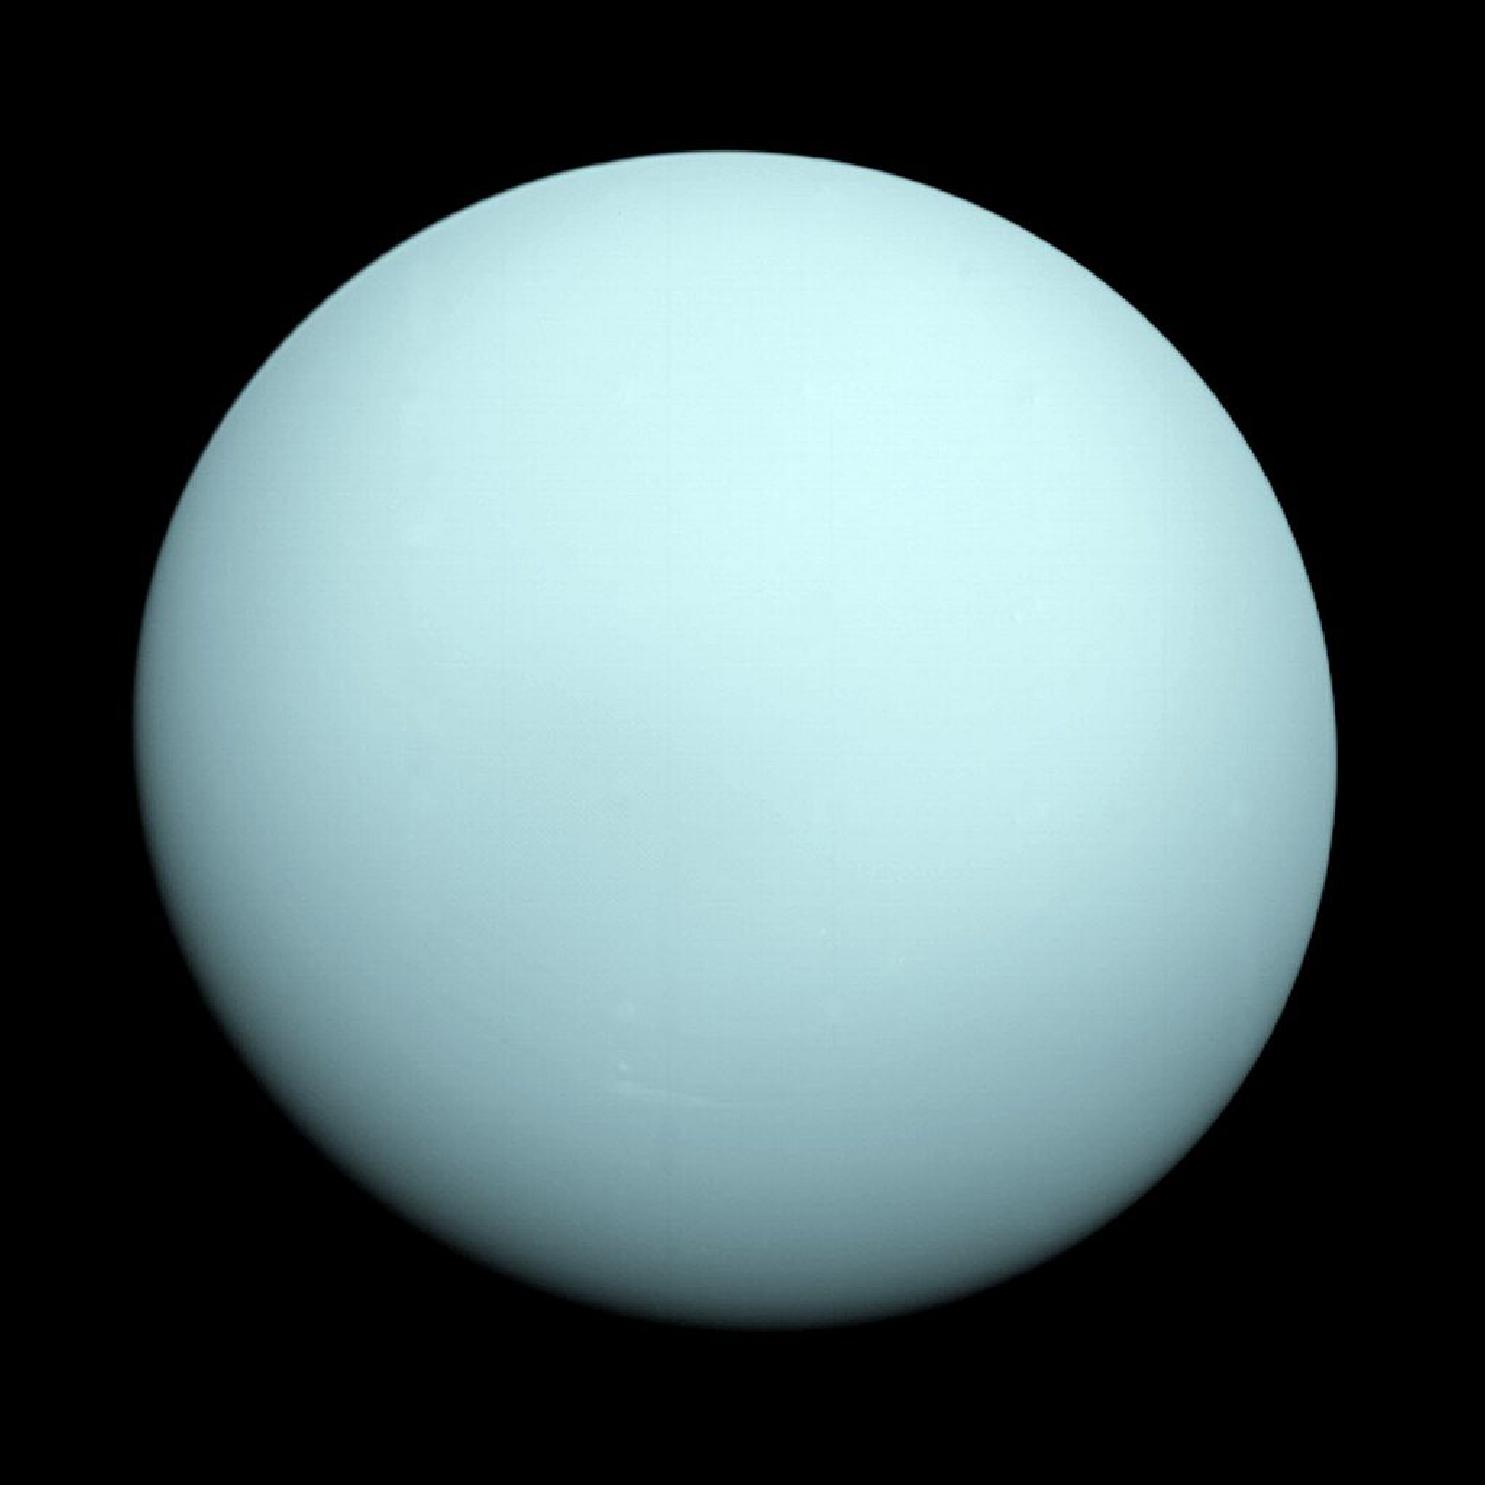 Figure 7: Voyager 2 took this image as it approached the planet Uranus on 14 January 1986. The planet's hazy bluish color is due to the methane in its atmosphere, which absorbs red wavelengths of light (image credit: NASA/JPL-Caltech)